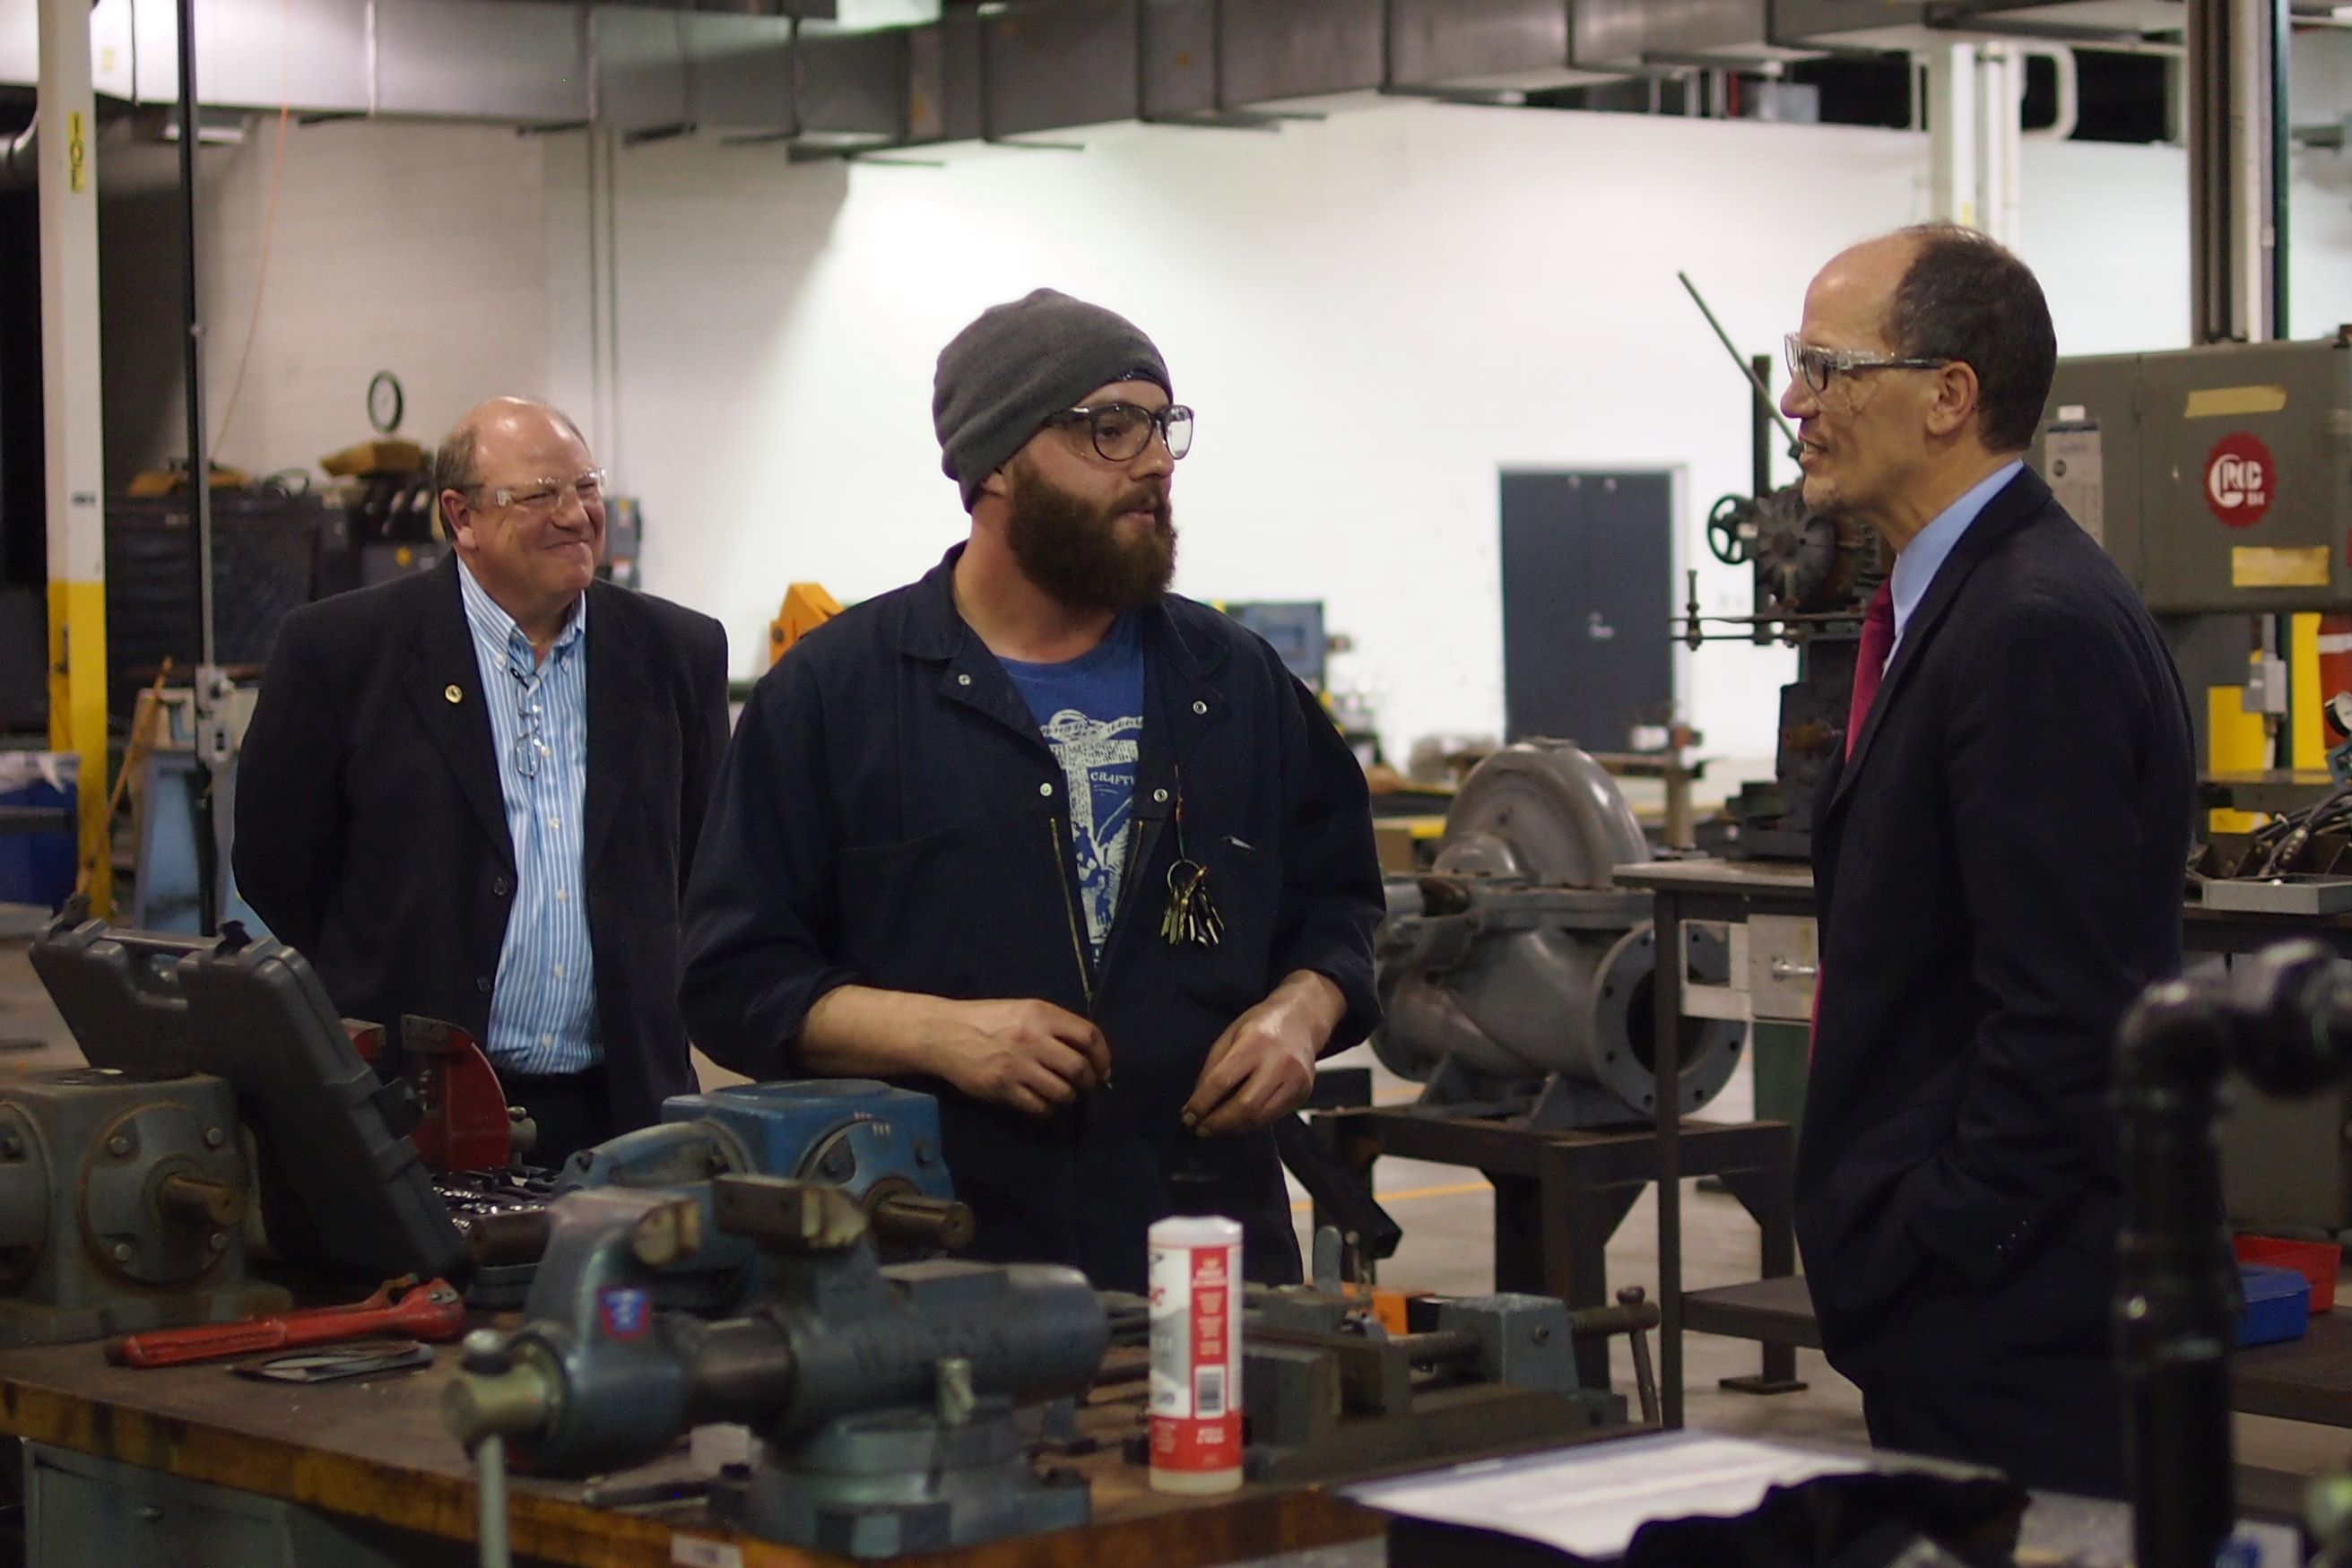 US Secretary of Labor Tom Perez chats with Joe Joerin, an apprentice at the UAW-Ford Technical Training Center. Mechanical engineering jobs are one of the occupations for which foreign workers can obtain H-1B visas. H-1B-eligible occupations are also a focus of the H-1B Ready to Work Partnership Grants, with the intent of enabling long-term unemployed American workers to fill these positions. (Photo: US Department of Labor)